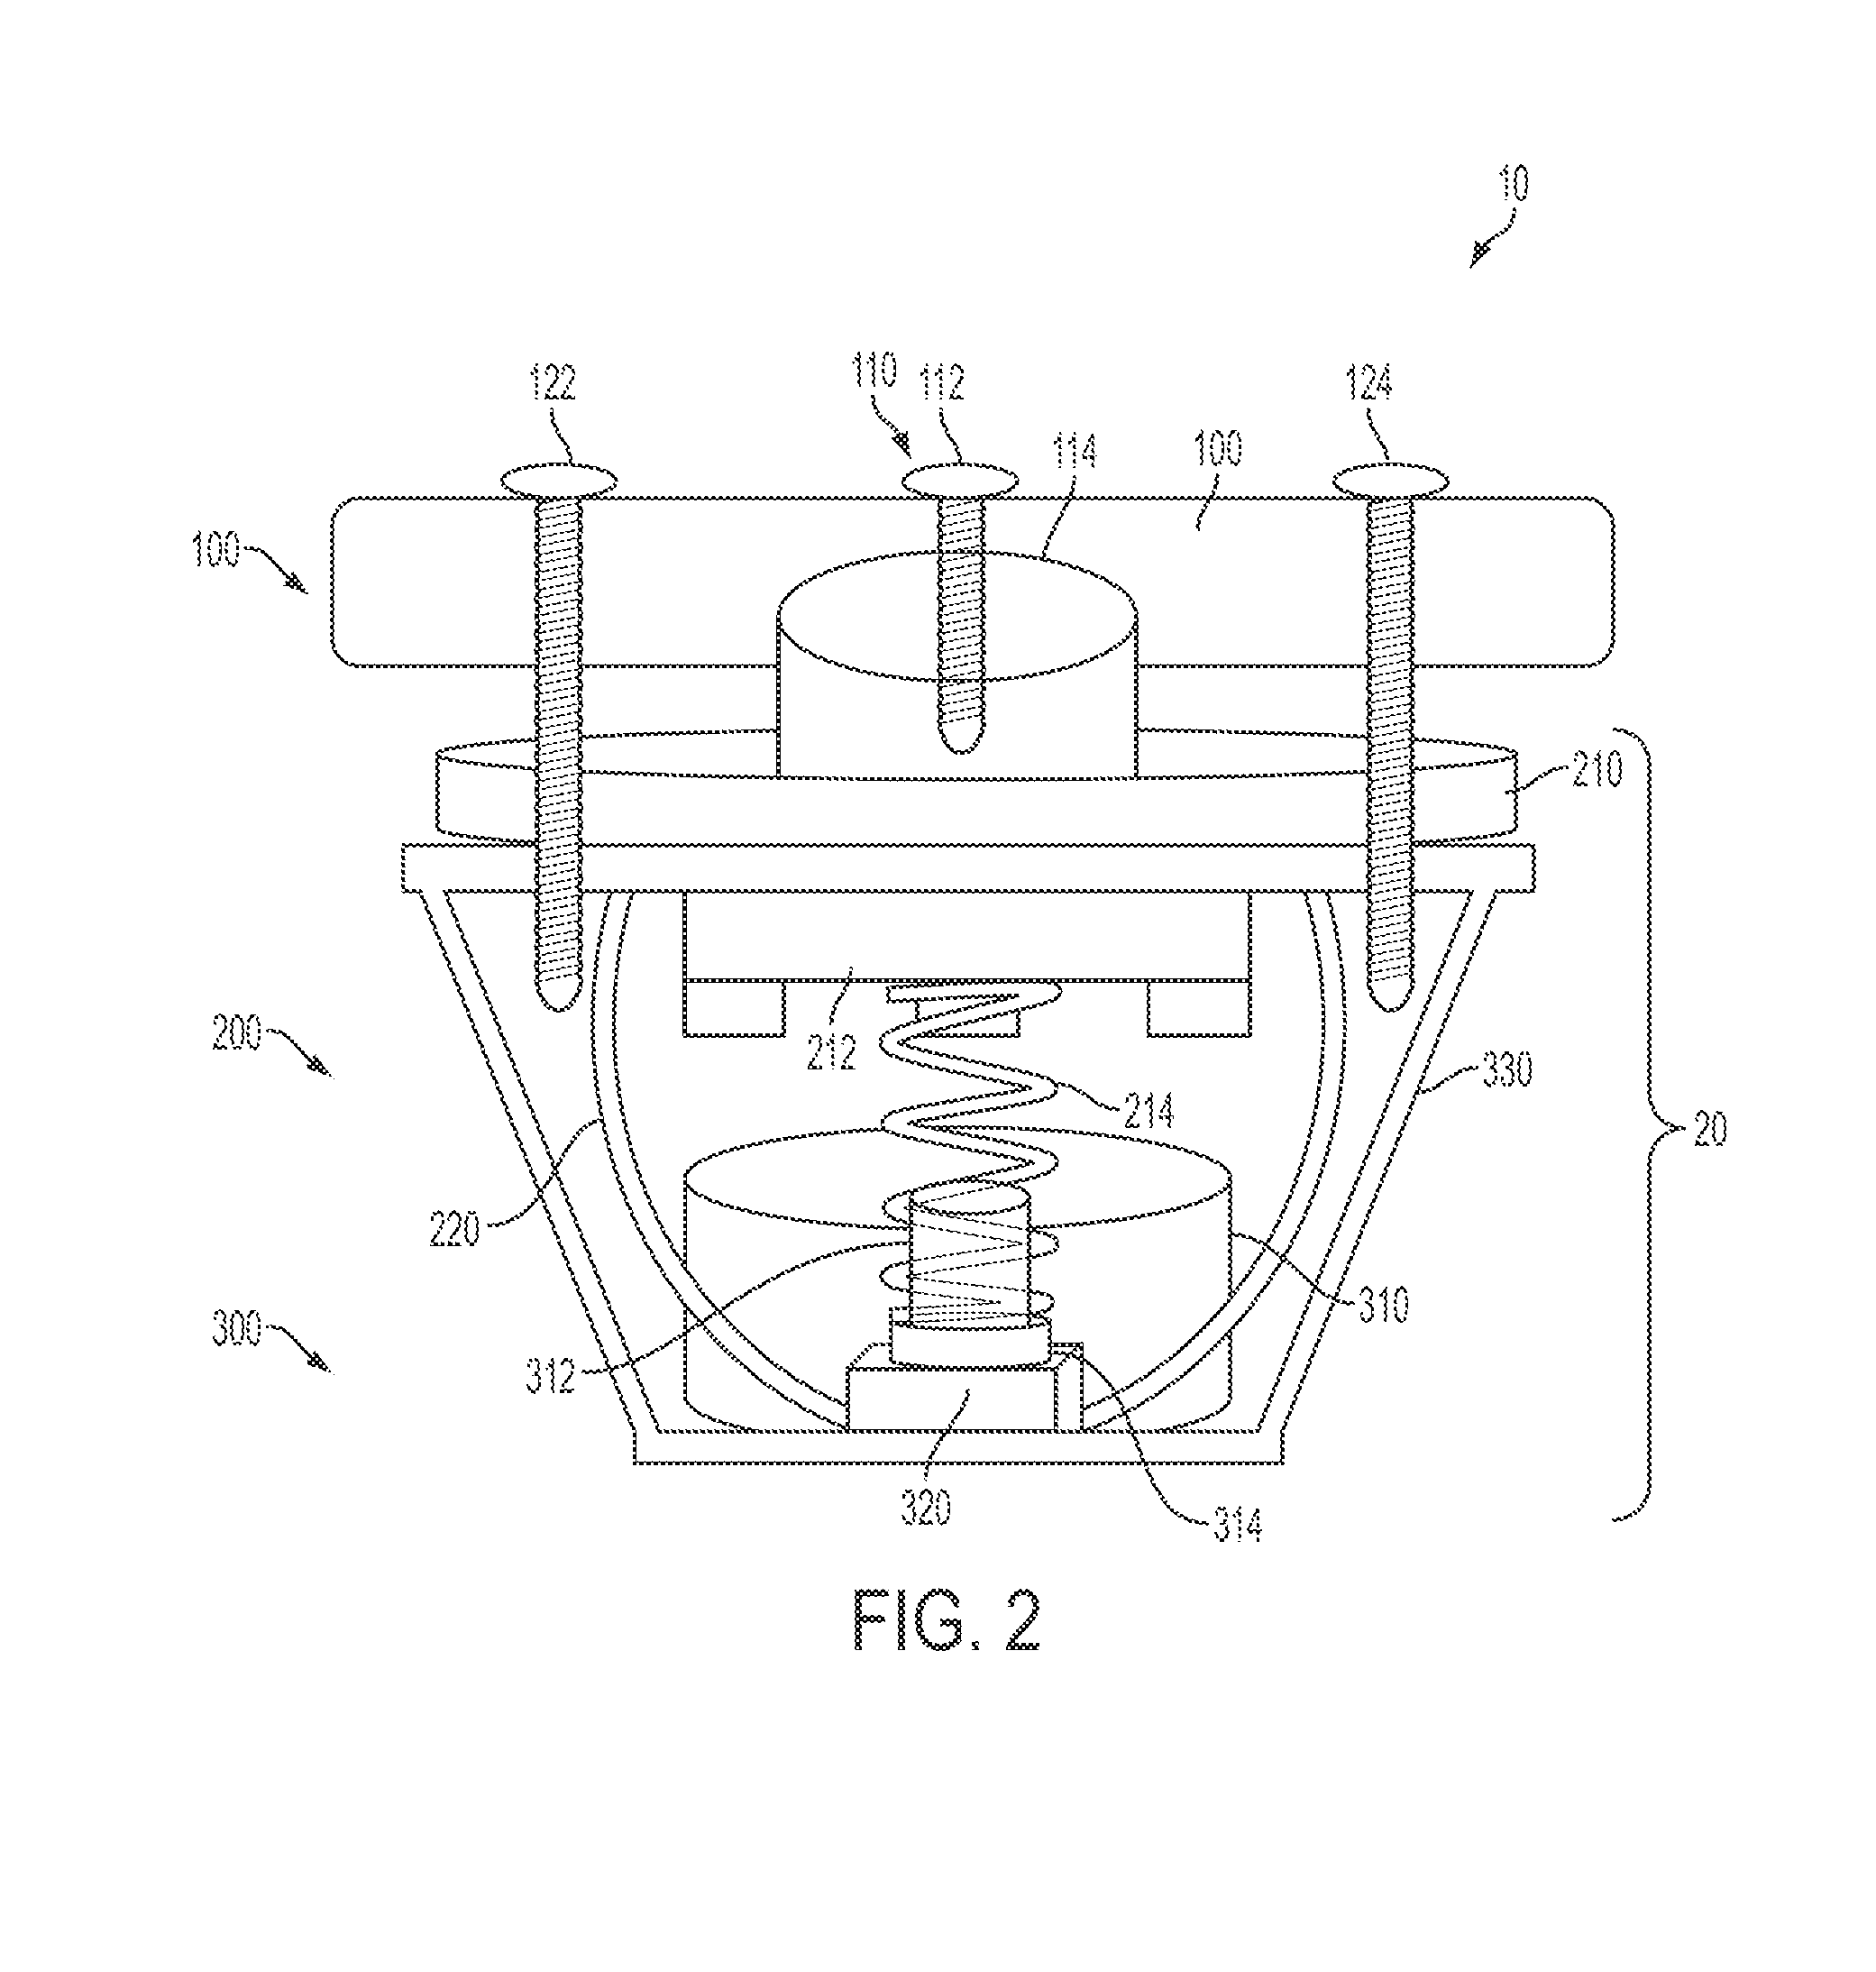 Exercise device and method of using same